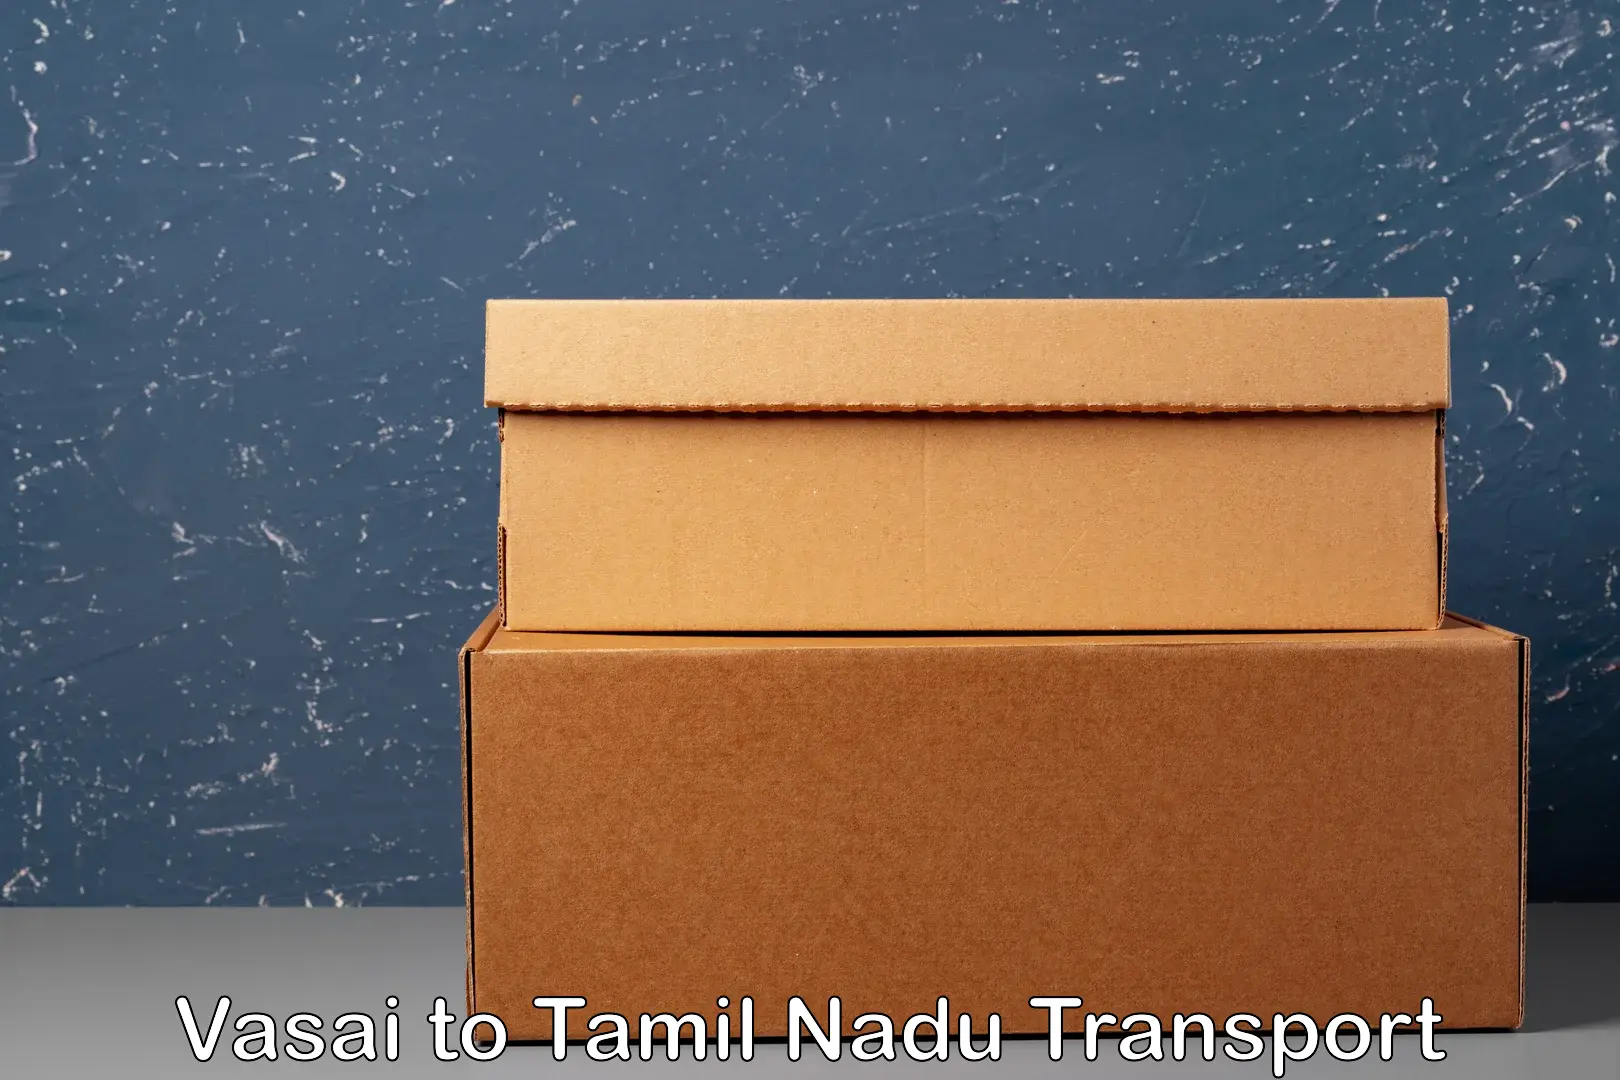 Air freight transport services Vasai to Saveetha Institute of Medical and Technical Sciences Chennai